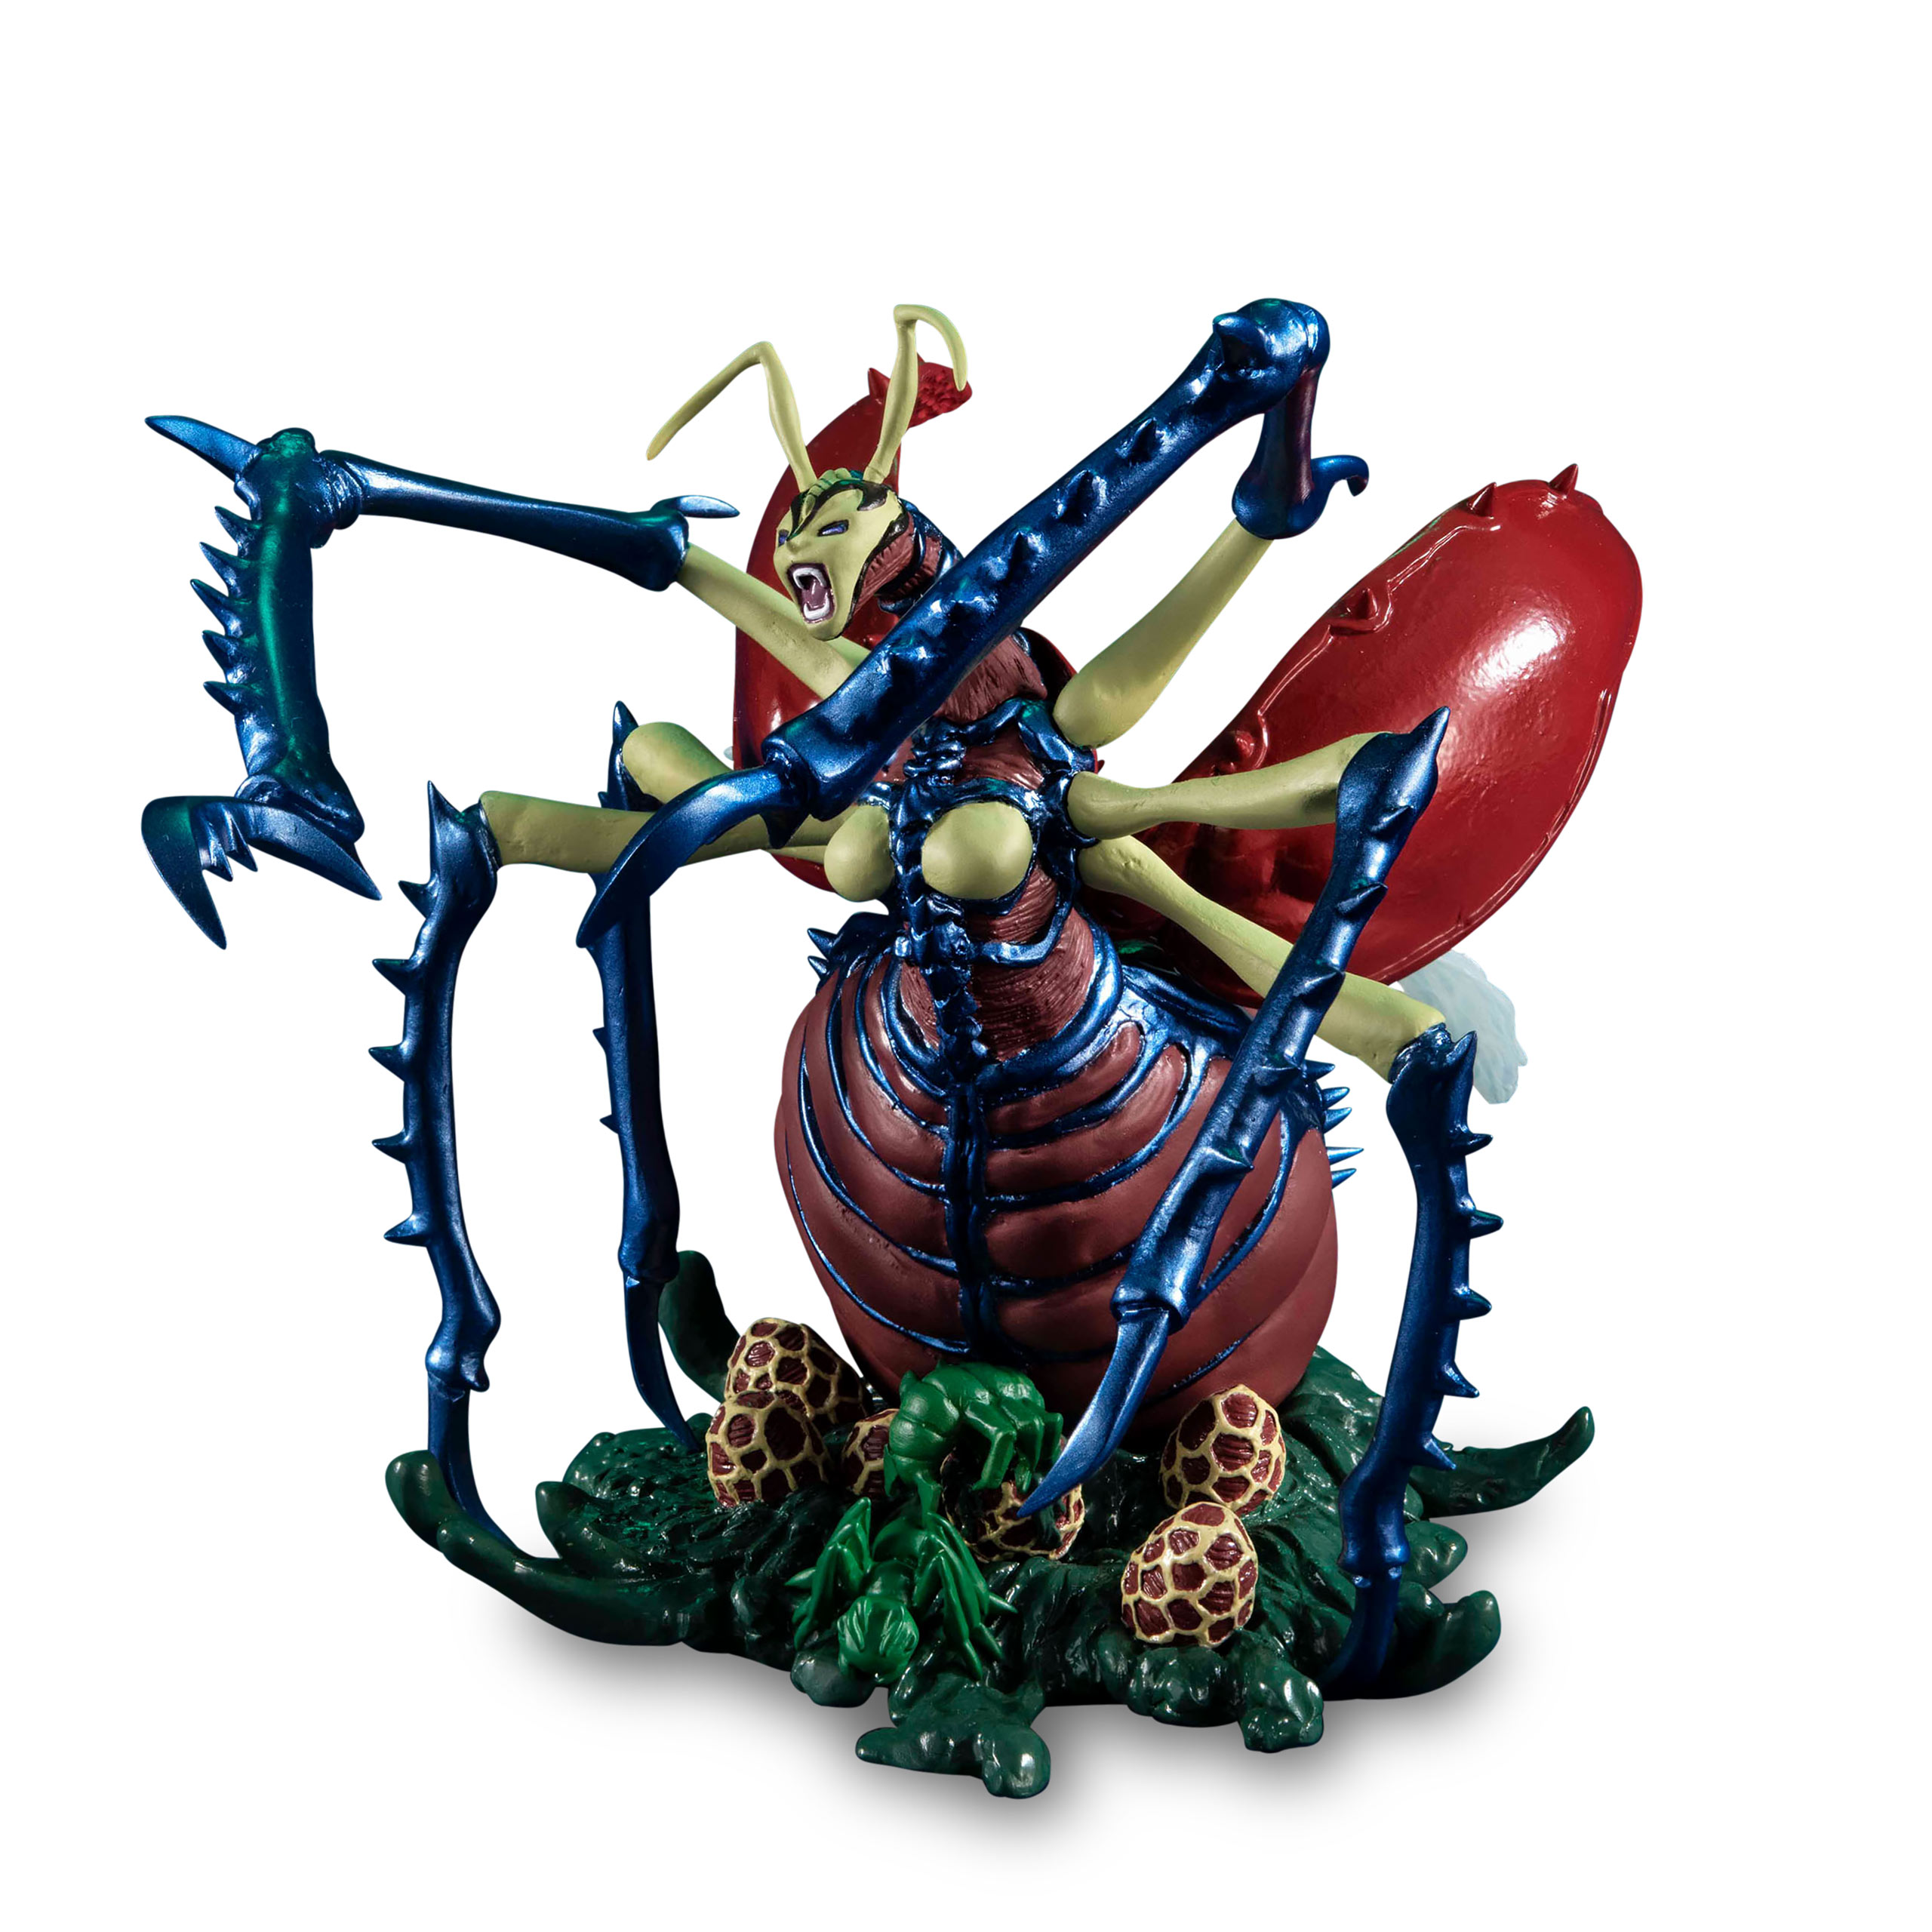 Yu-Gi-Oh ! - Insect Queen Duel Monsters Statue